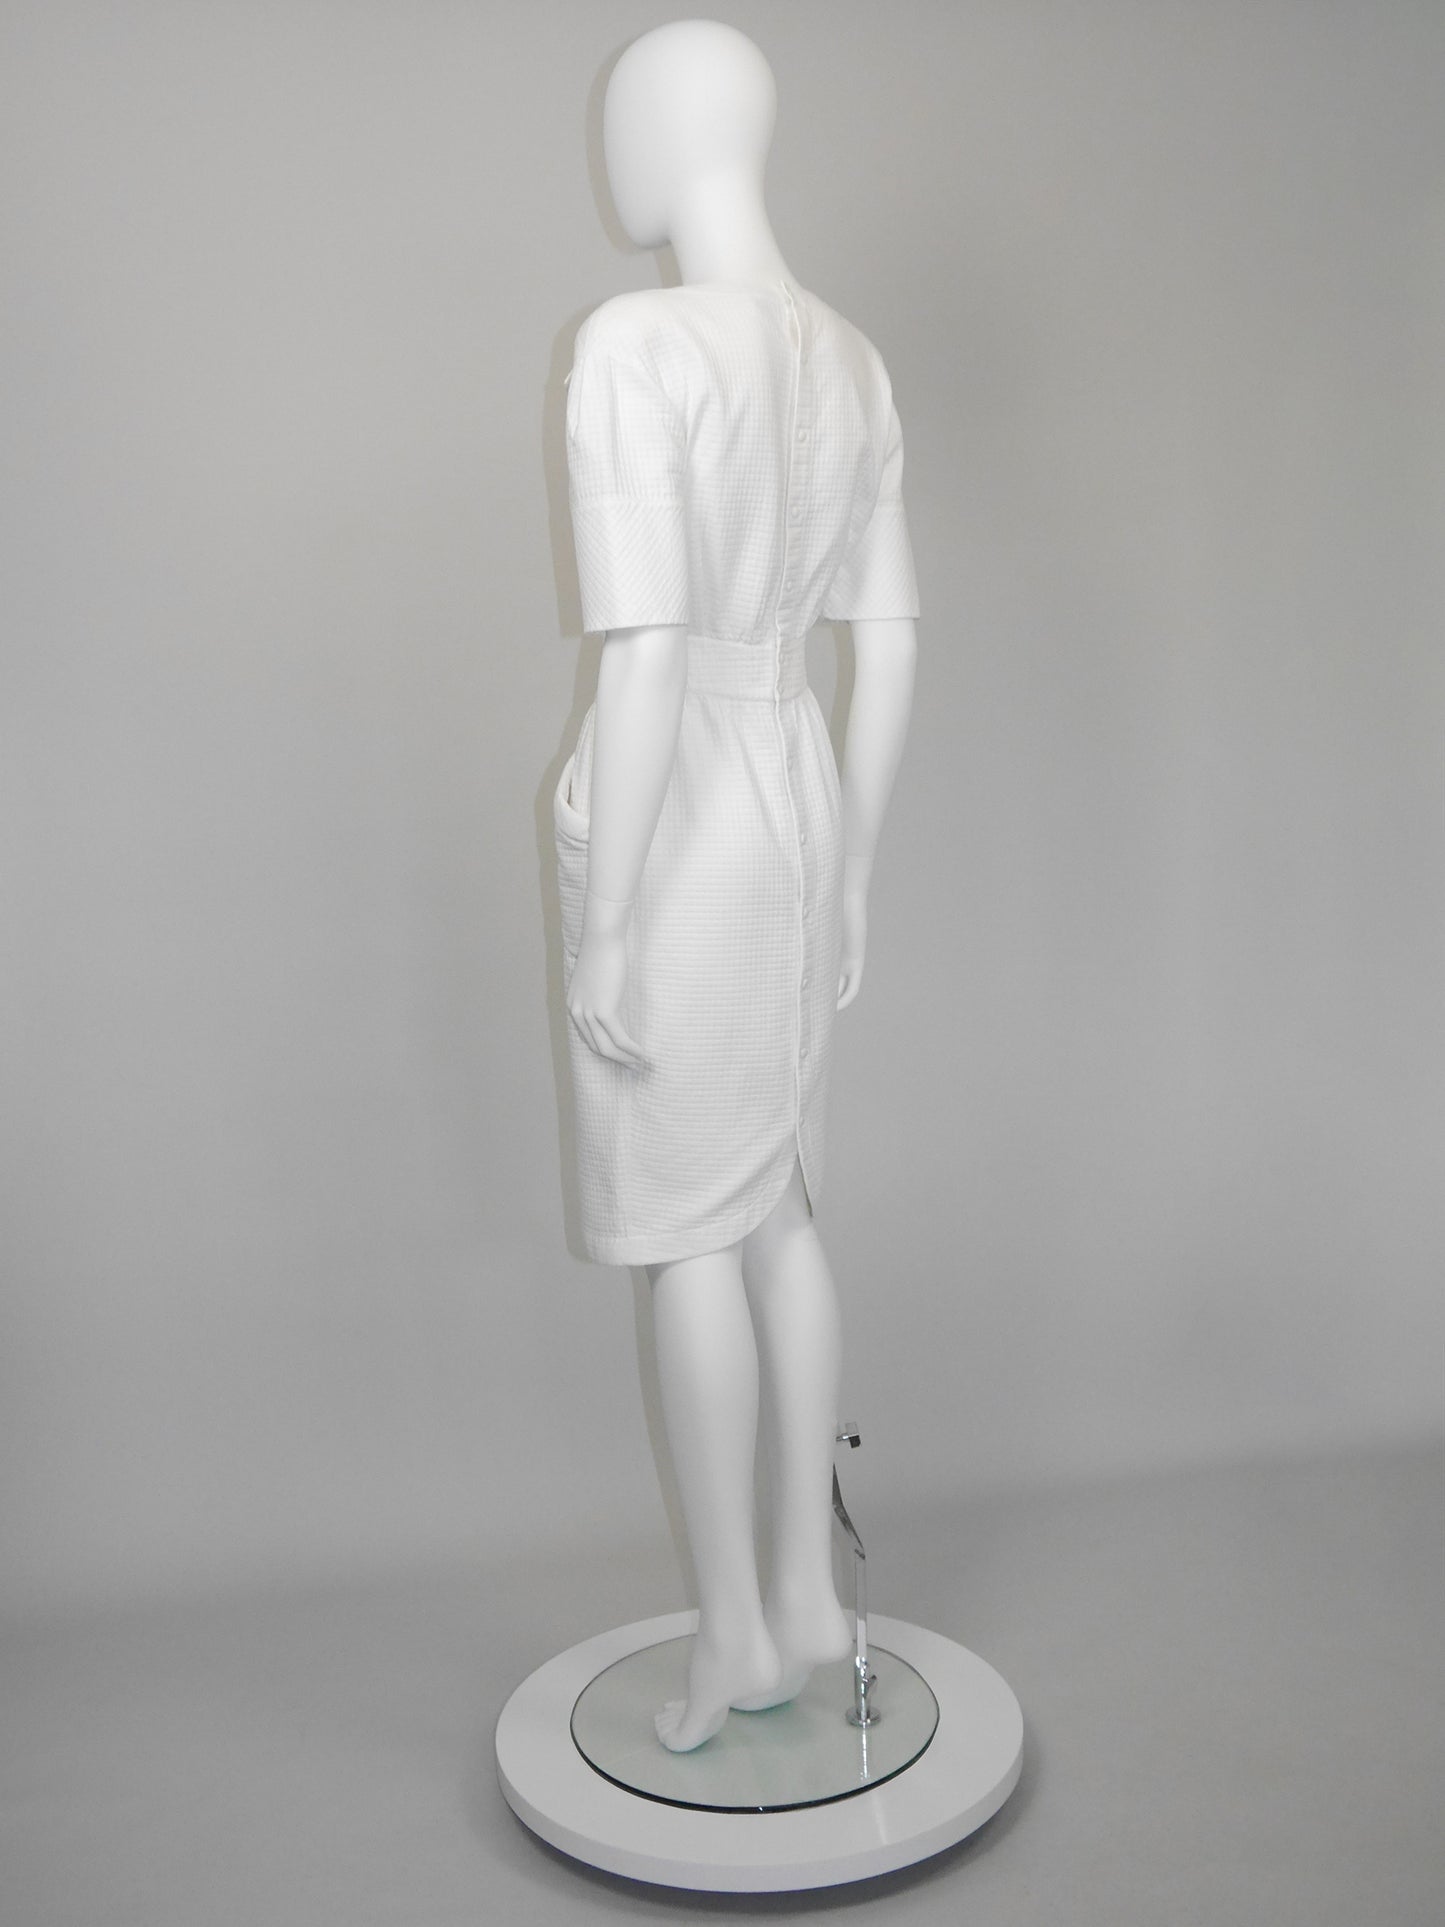 THIERRY MUGLER 1980s 1990s Vintage White Waffle Weave Sculpted Dress Size XS